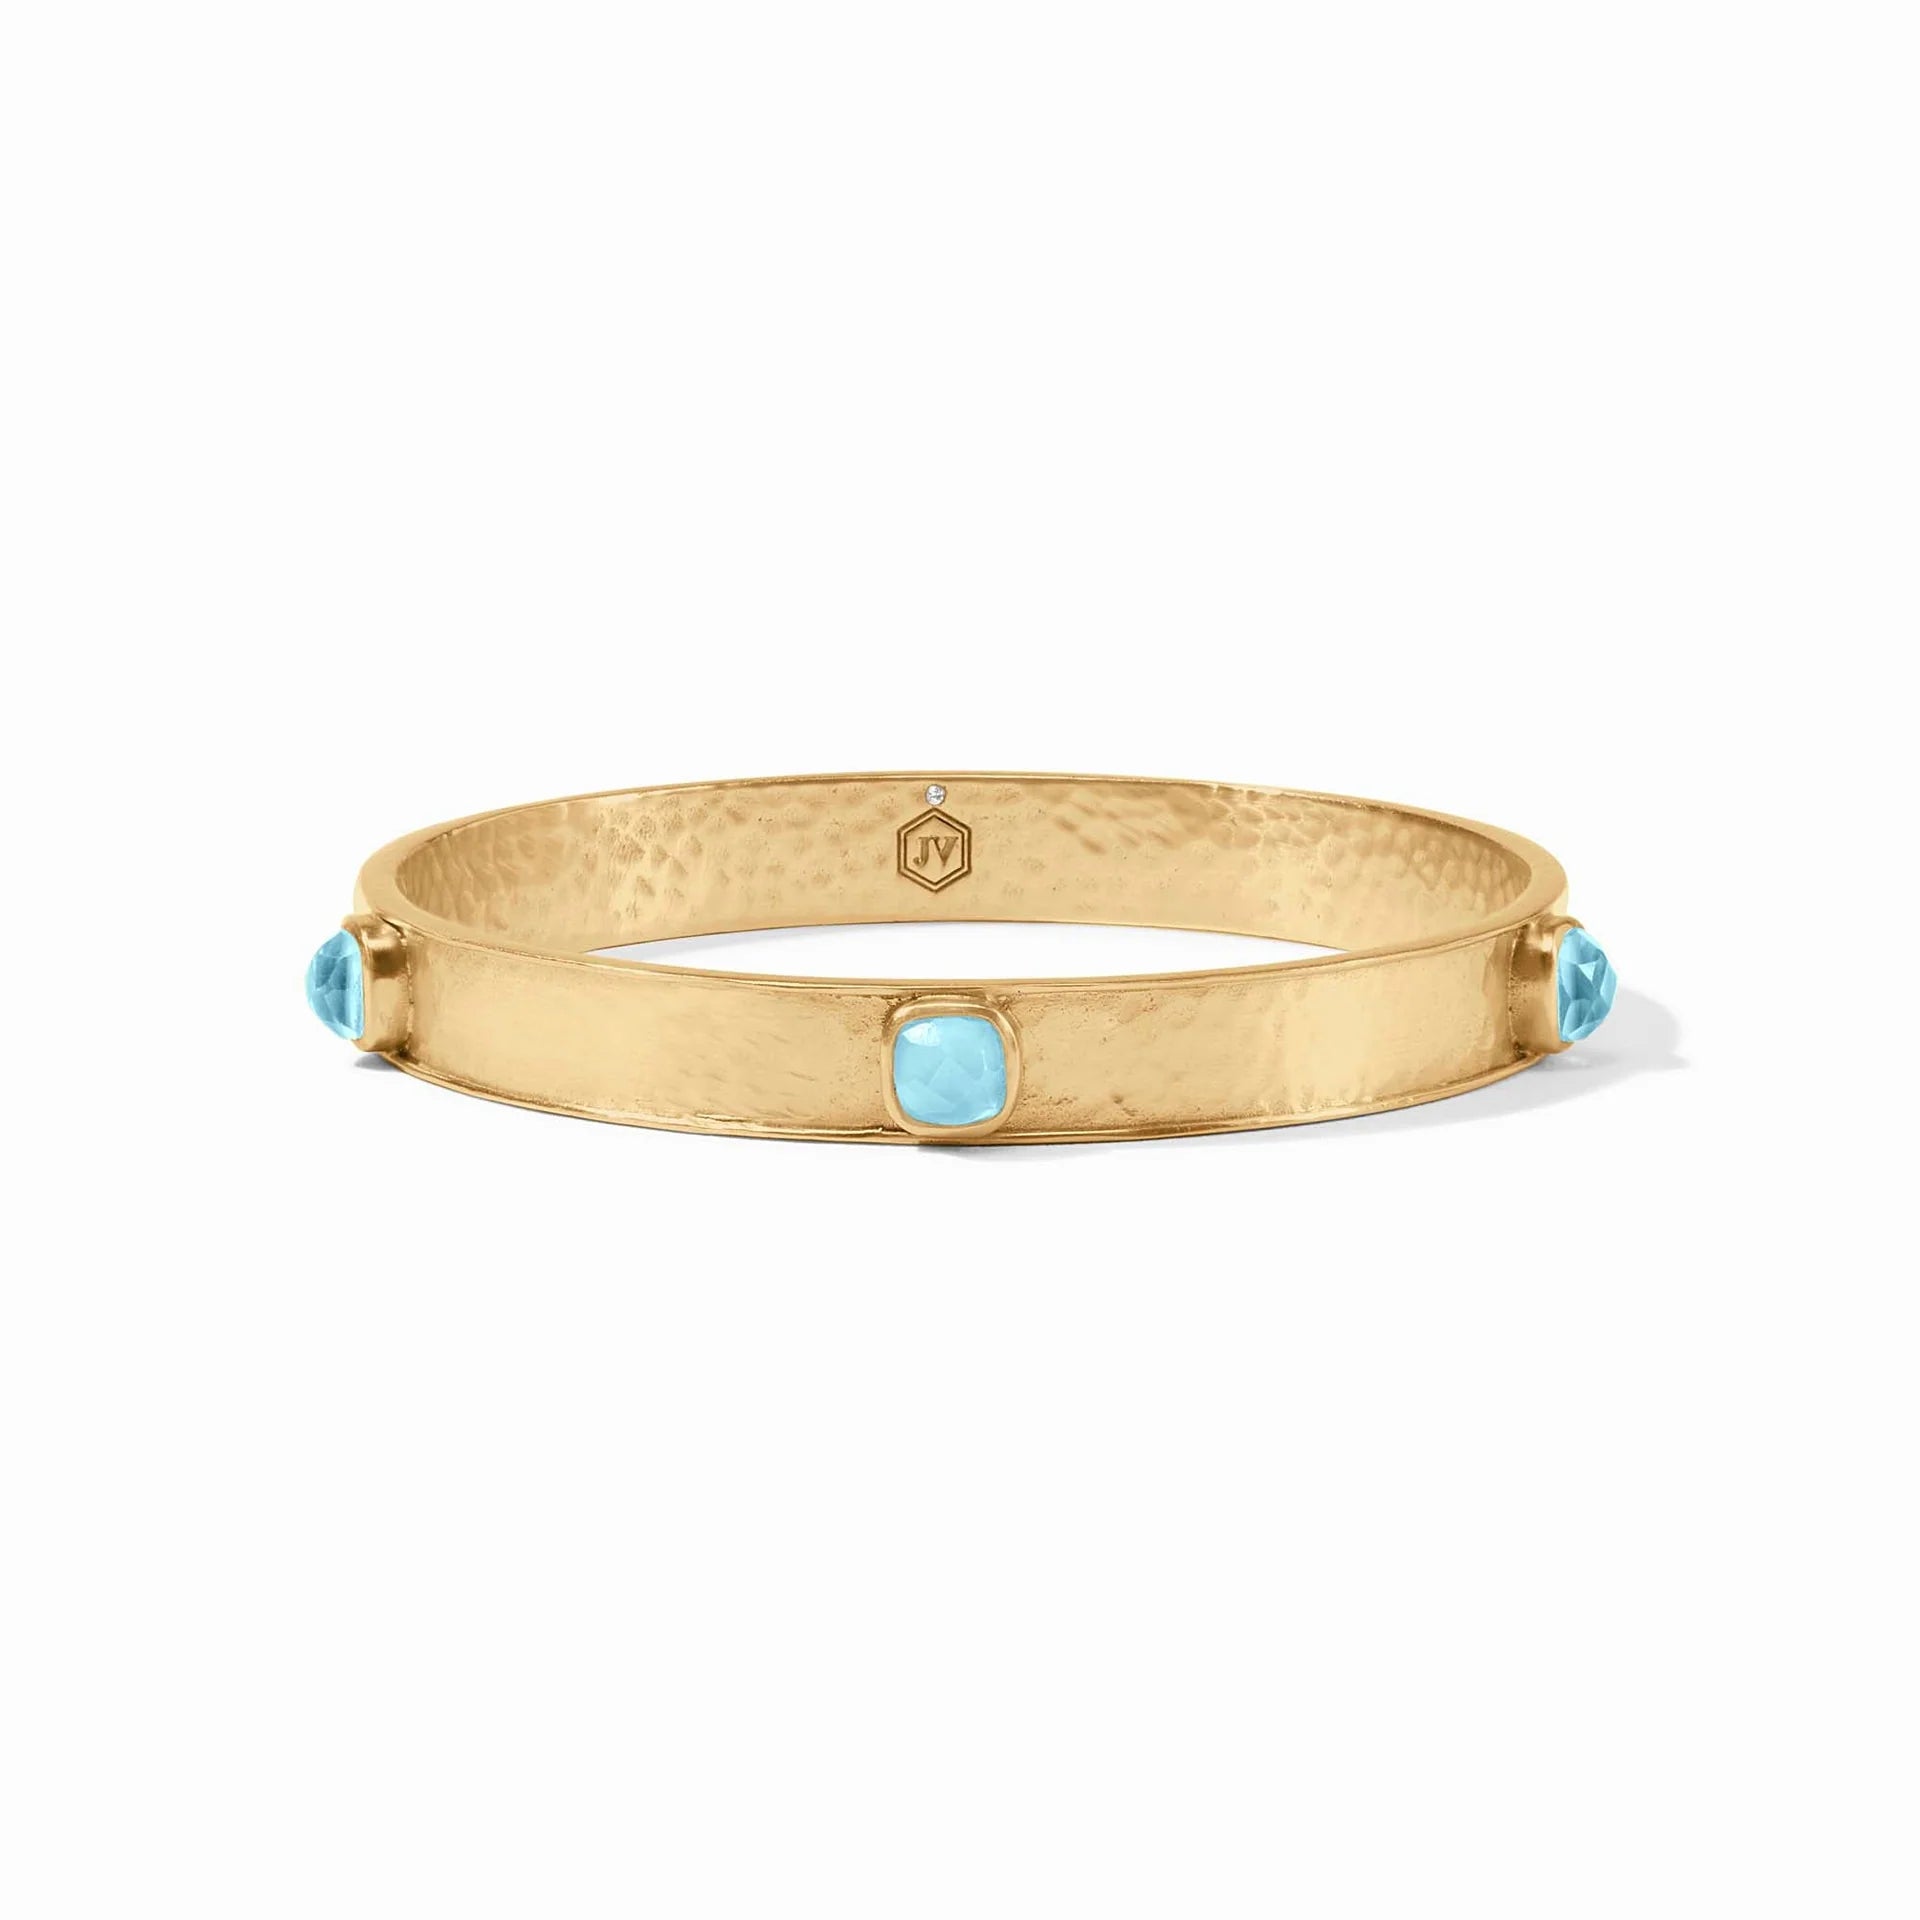 Julie Vos | Catalina Stone Bangle with Iridescent Capri Blue Stones in Gold - Giddy Up Glamour Boutique